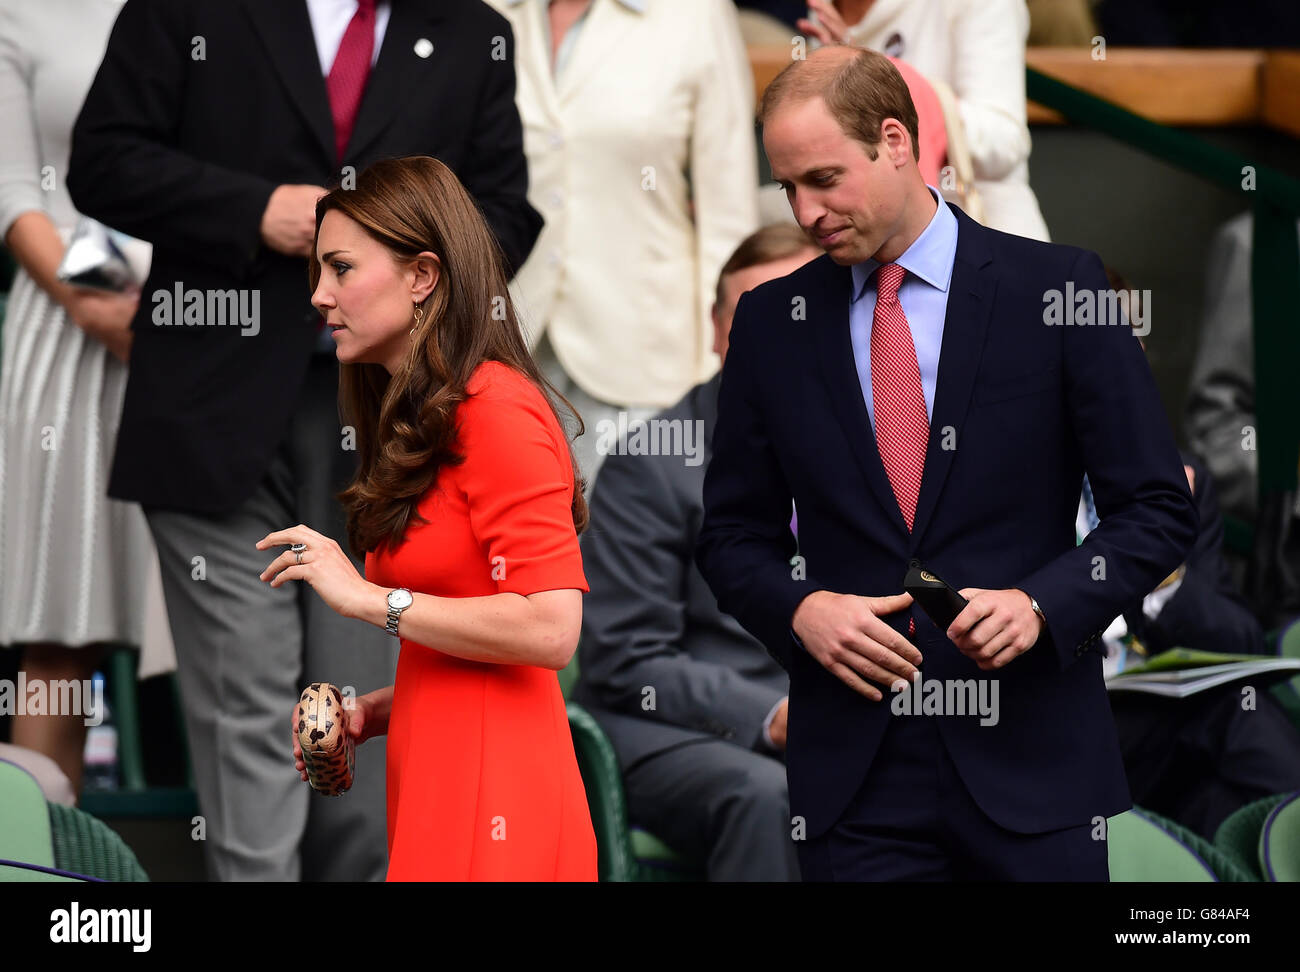 The Duke and Duchess of Cambridge in the royal box during day Nine of the Wimbledon Championships at the All England Lawn Tennis and Croquet Club, Wimbledon. Stock Photo